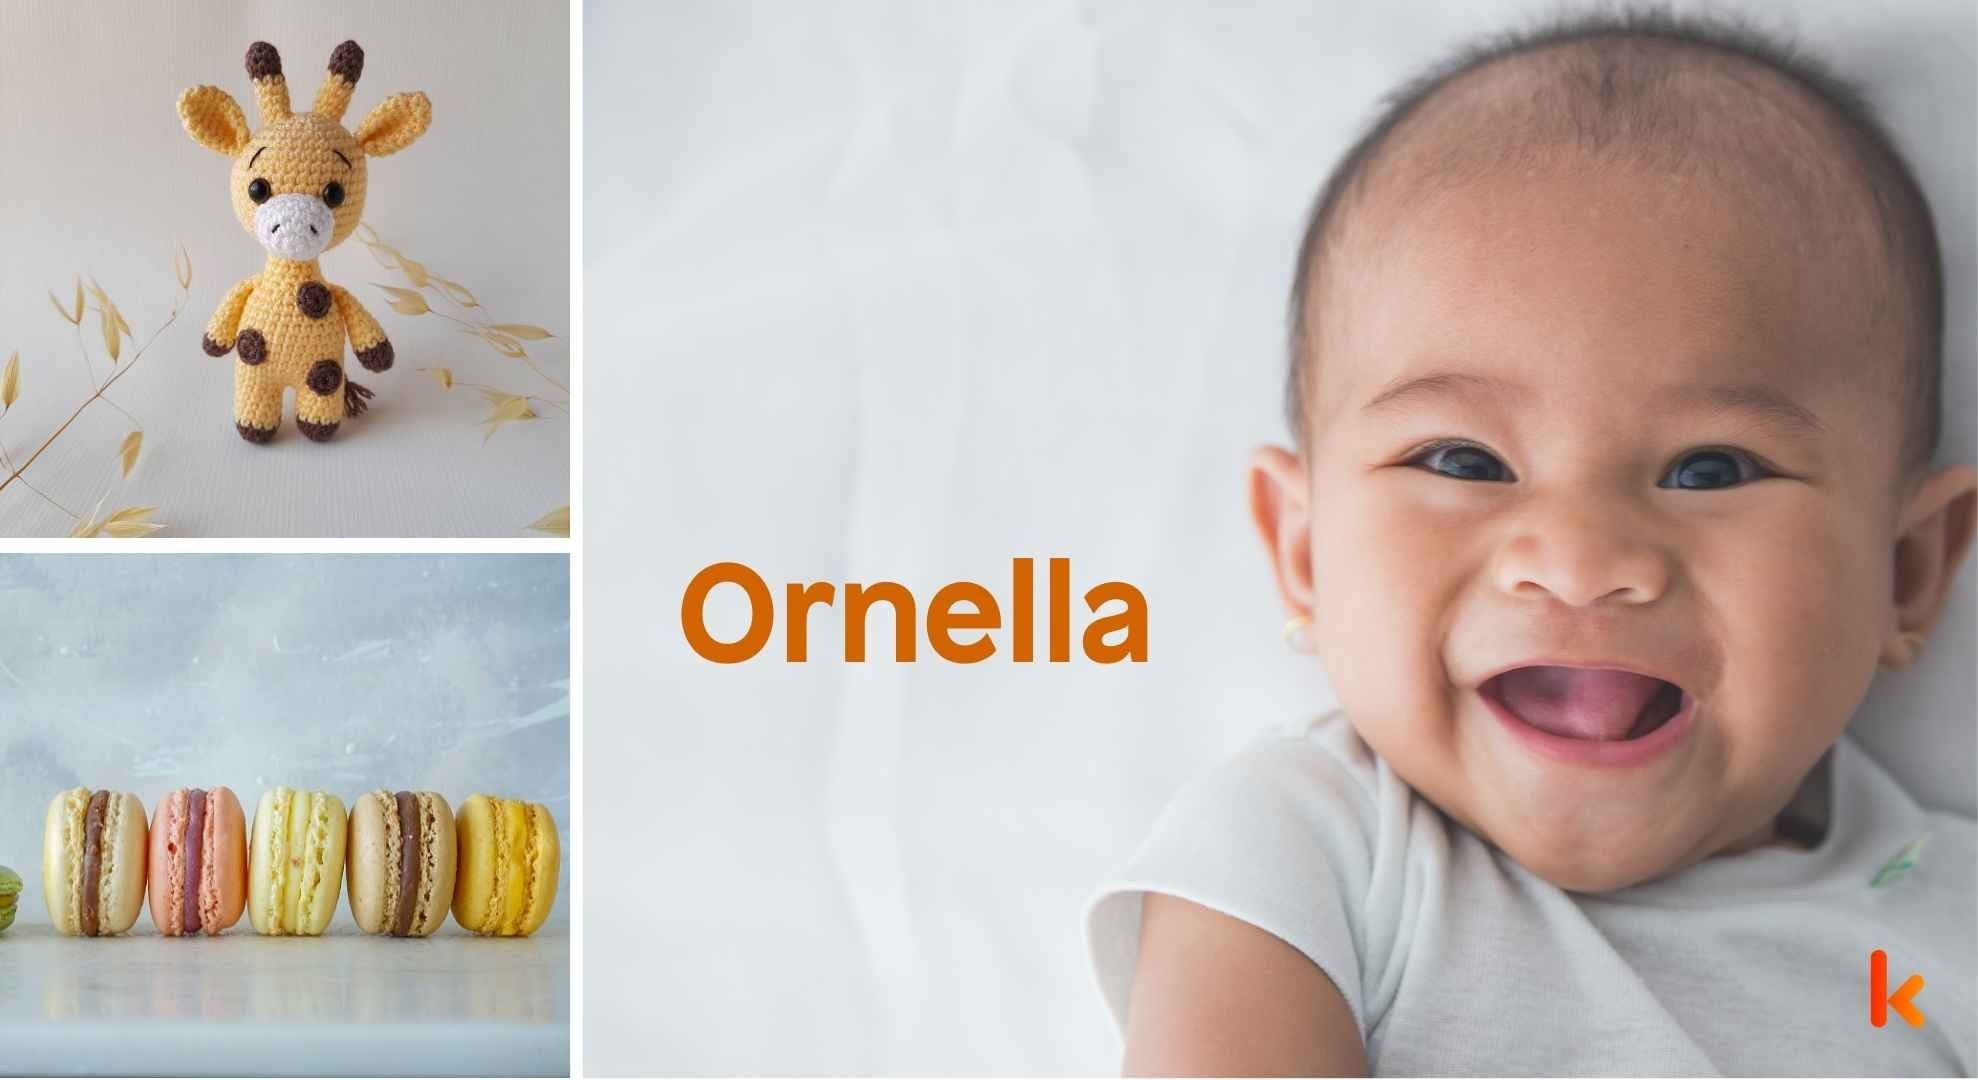 Meaning of the name Ornella